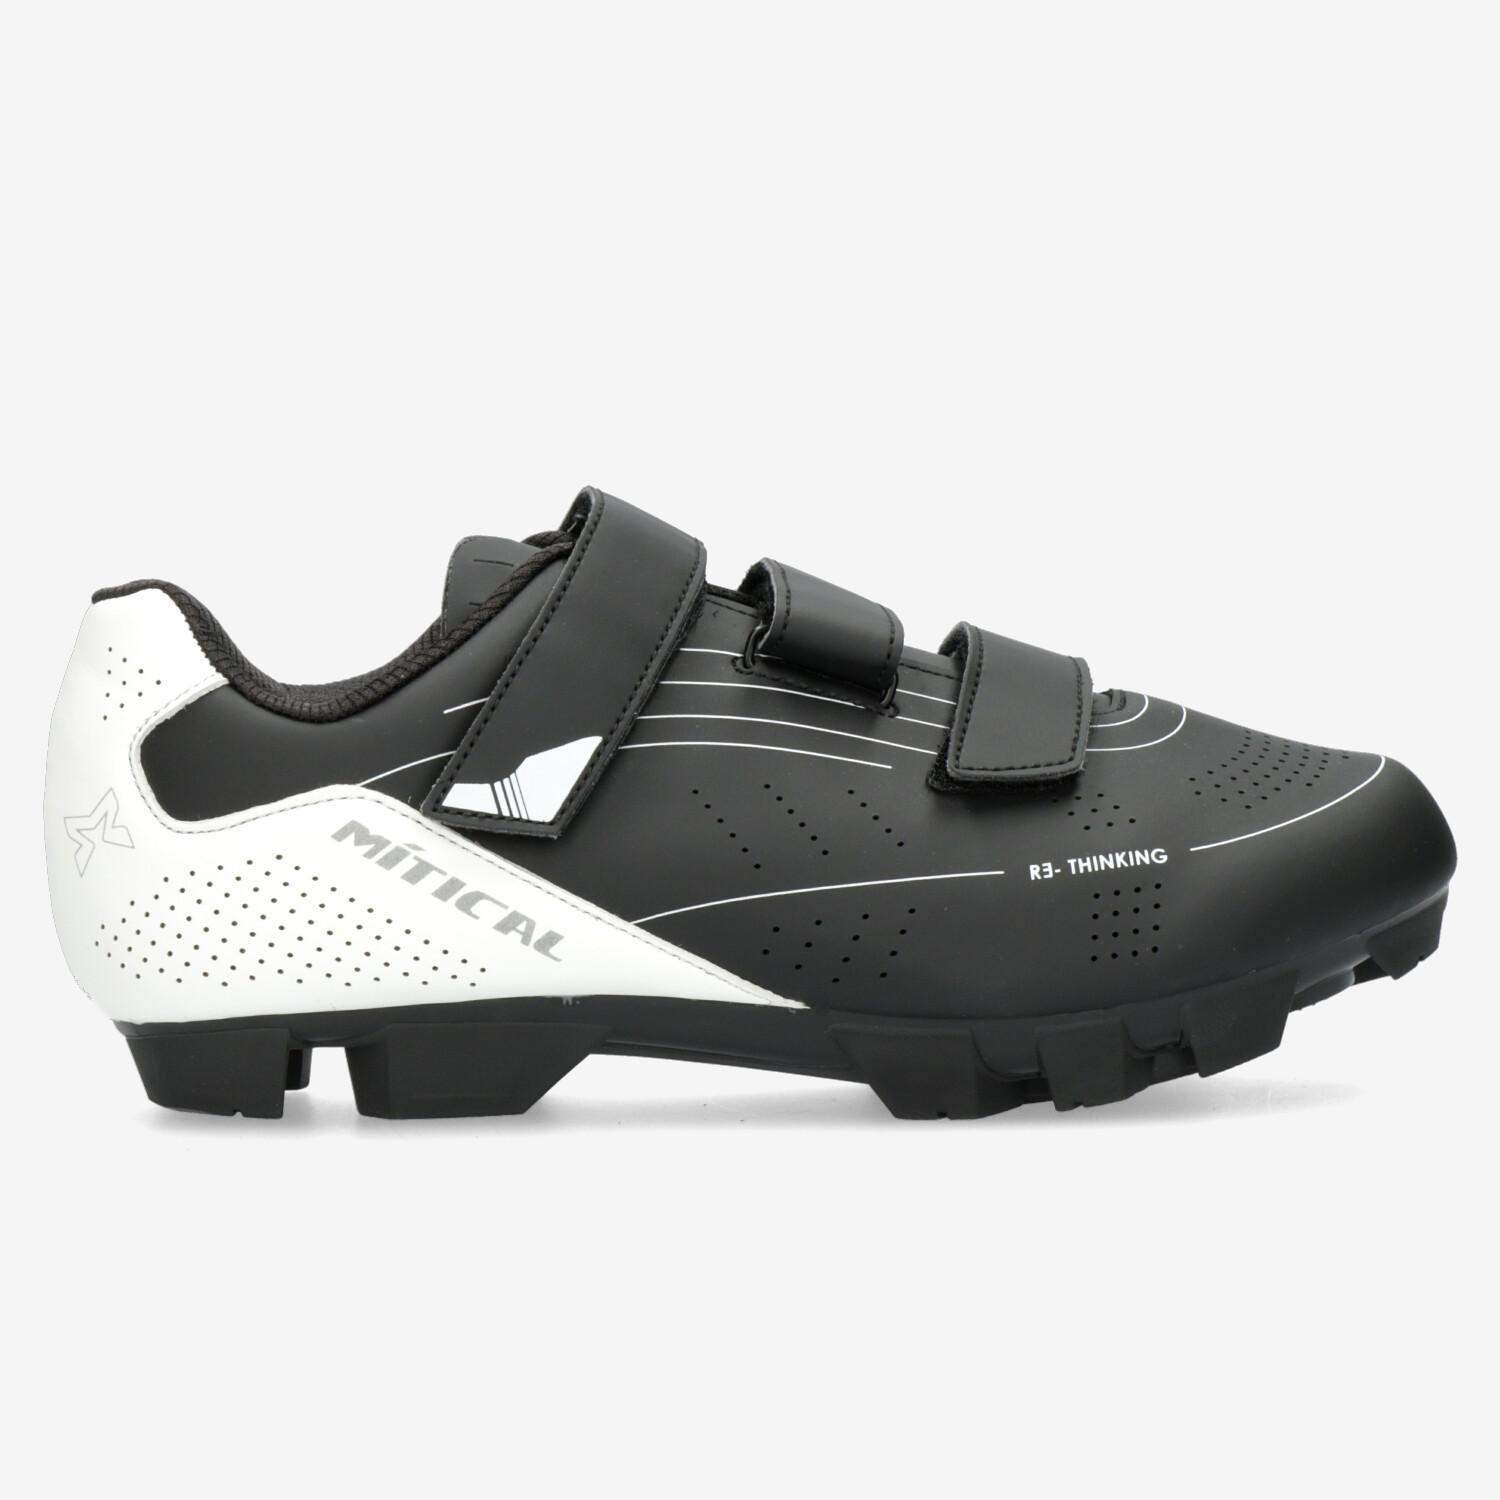 Mítical Froome - Noir - Chaussures Cyclisme Homme sports taille 45